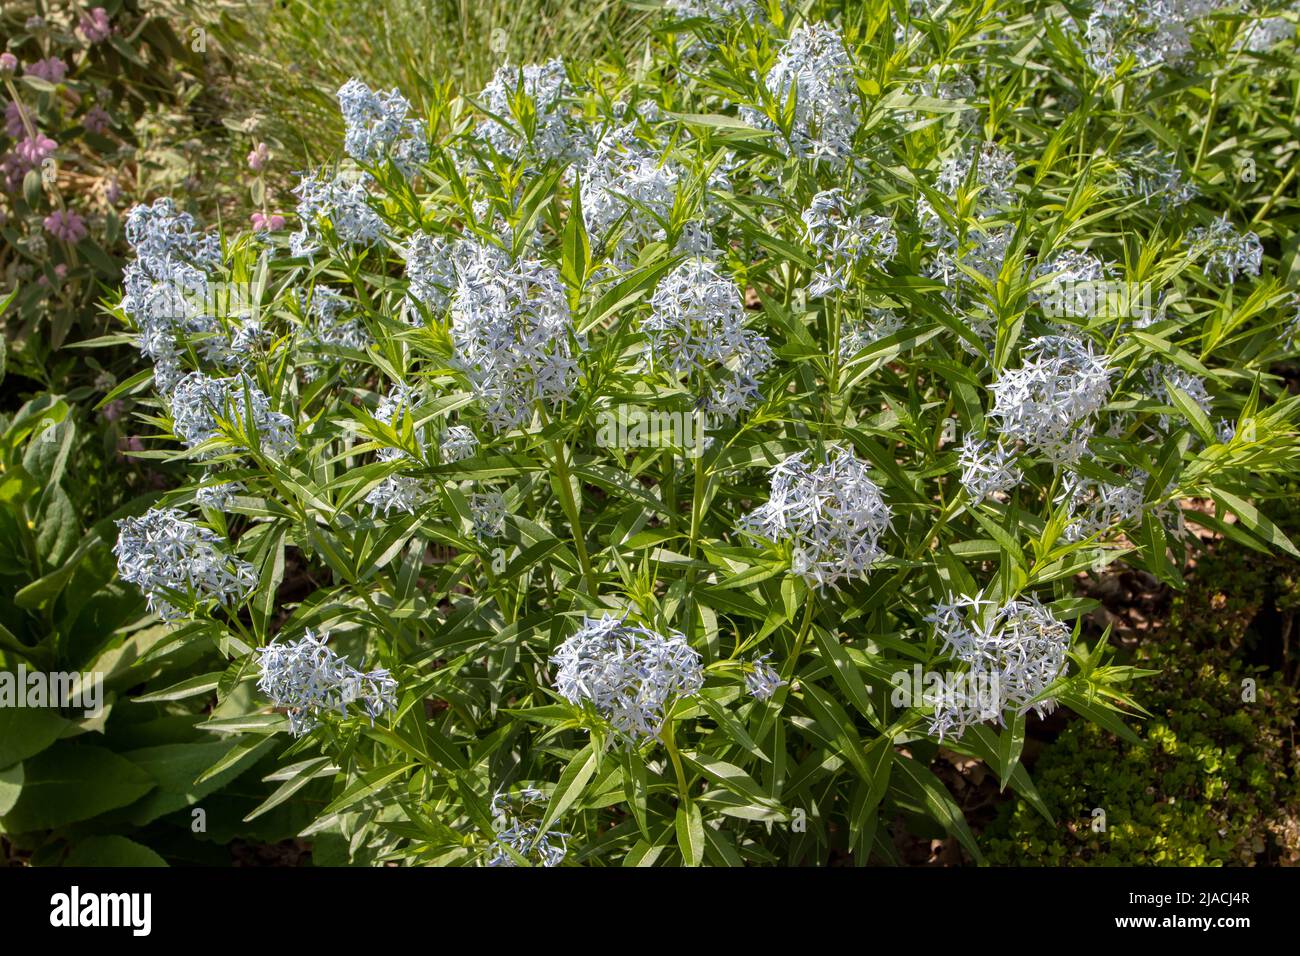 Amsonia tabernaemontana or Blue star or Eastern bluestar plant with pale blue star-shaped flowers Stock Photo